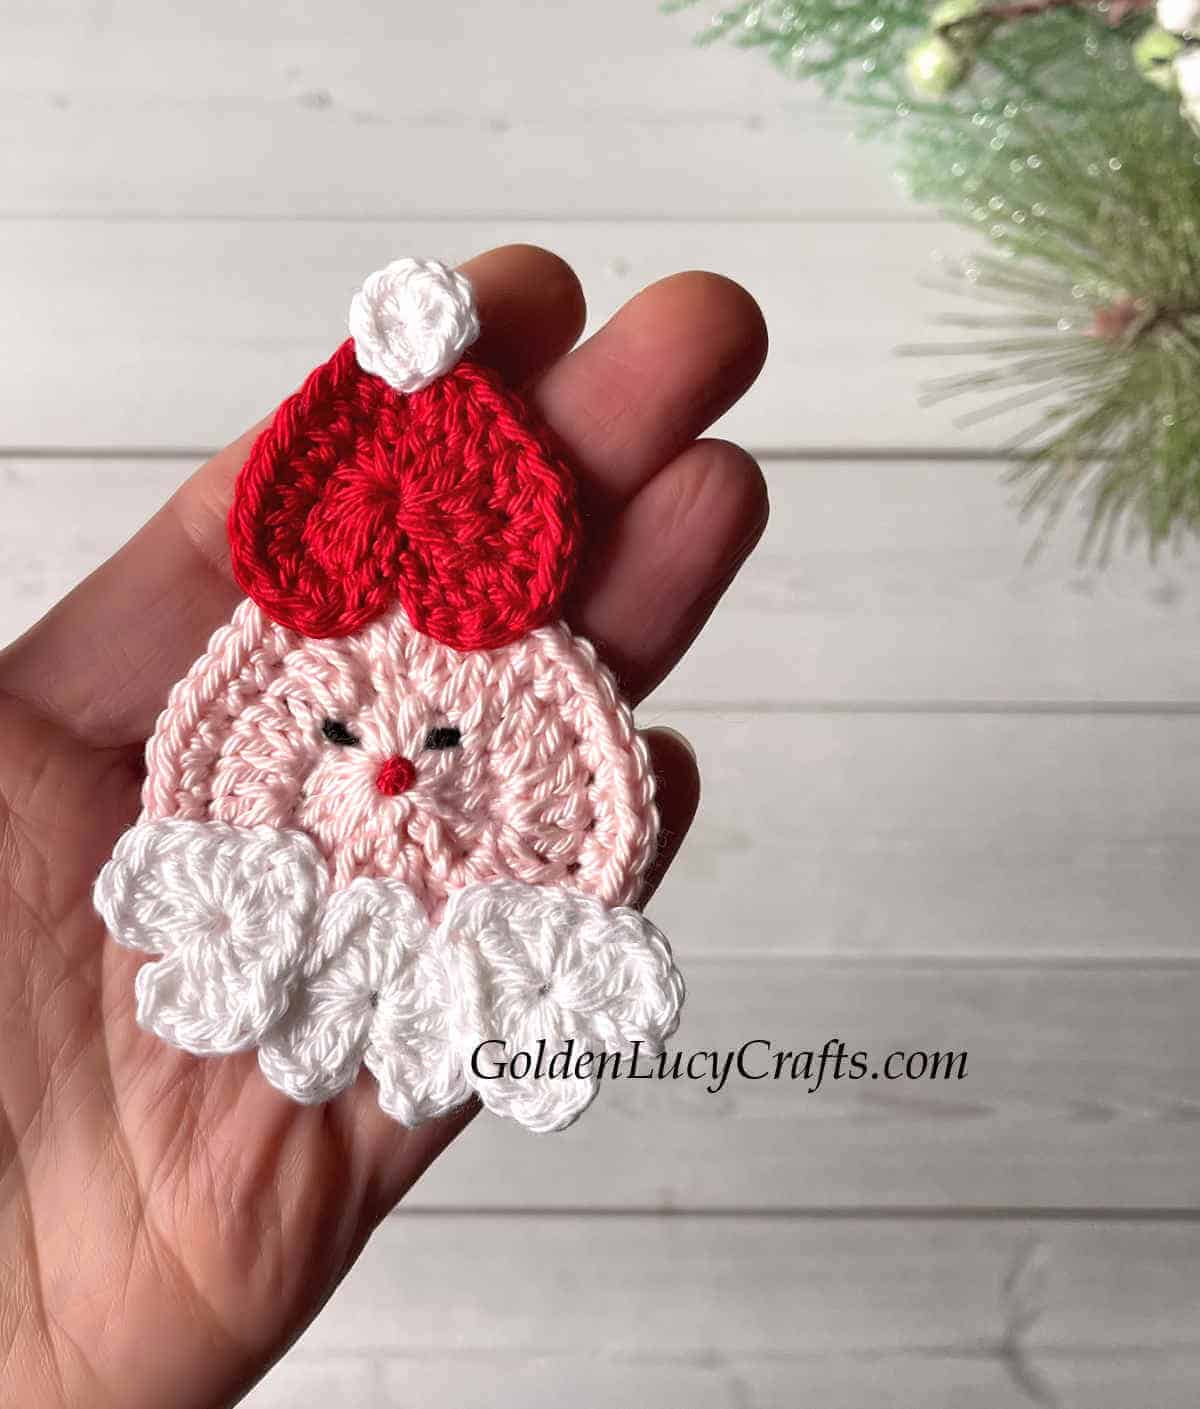 Crocheted Santa ornament is the palm of a hand.